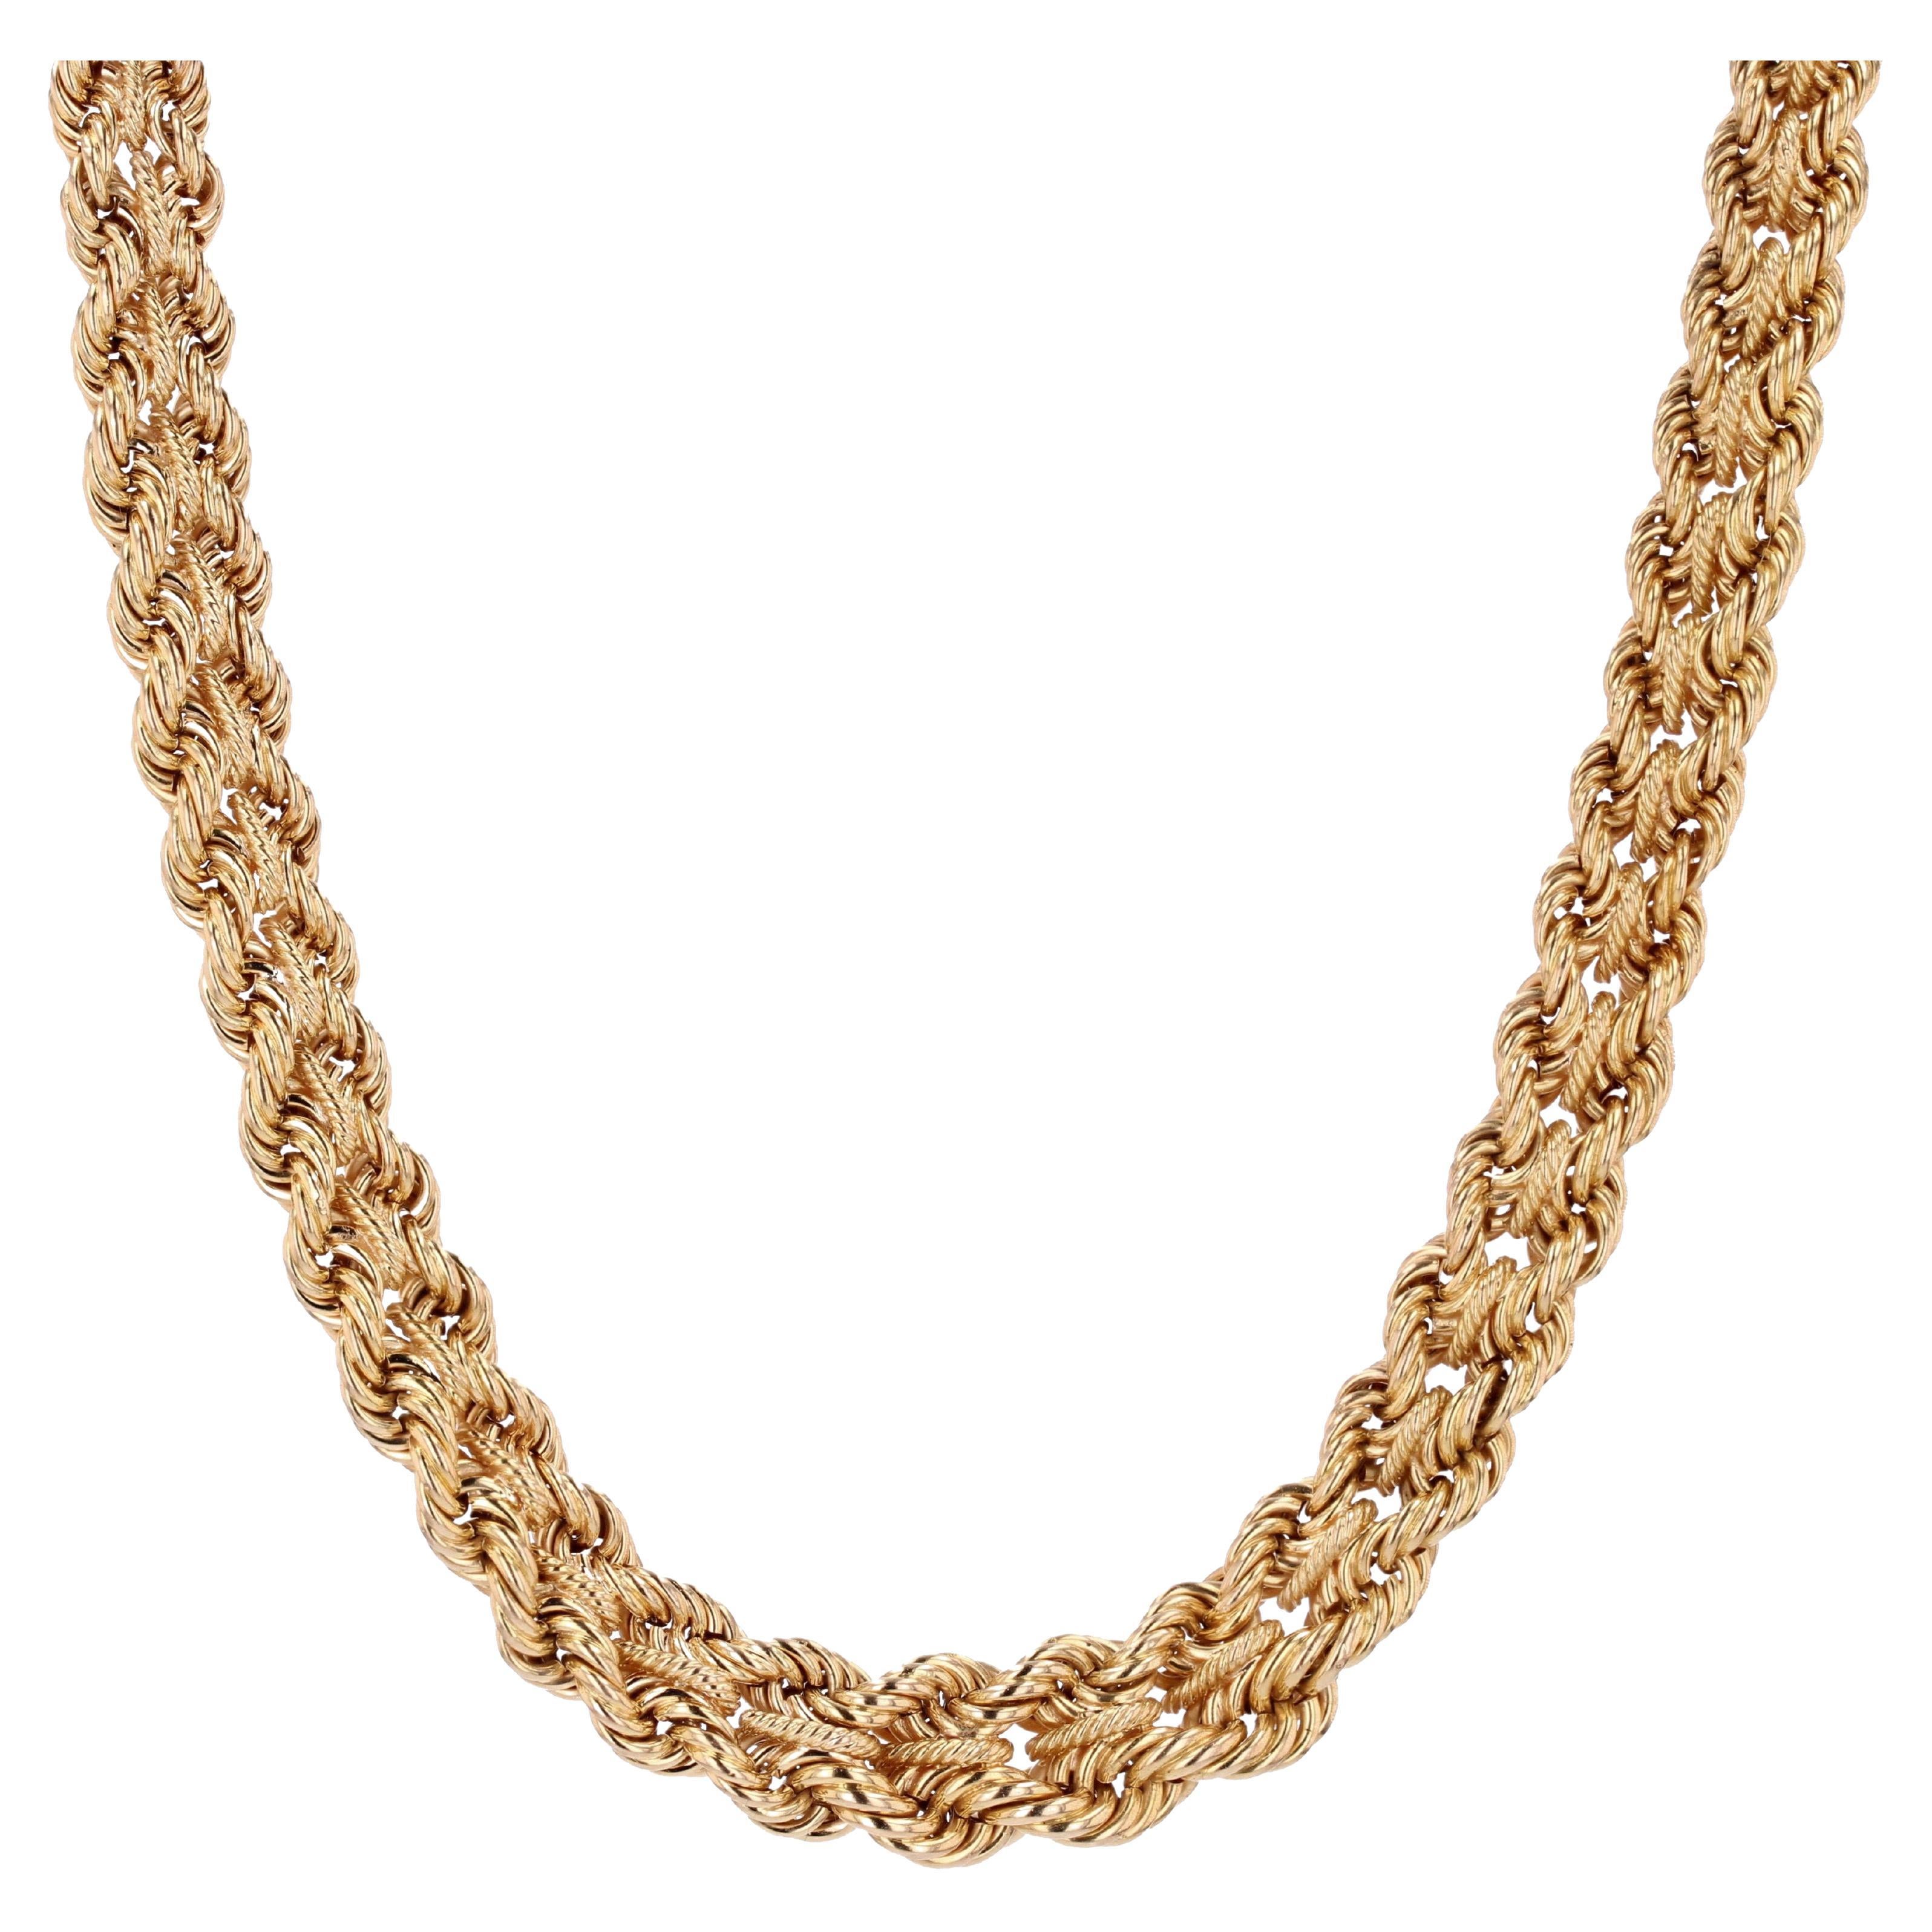 French 1950s 18 Karat Yellow Gold Falling Braided Choker Necklace For Sale